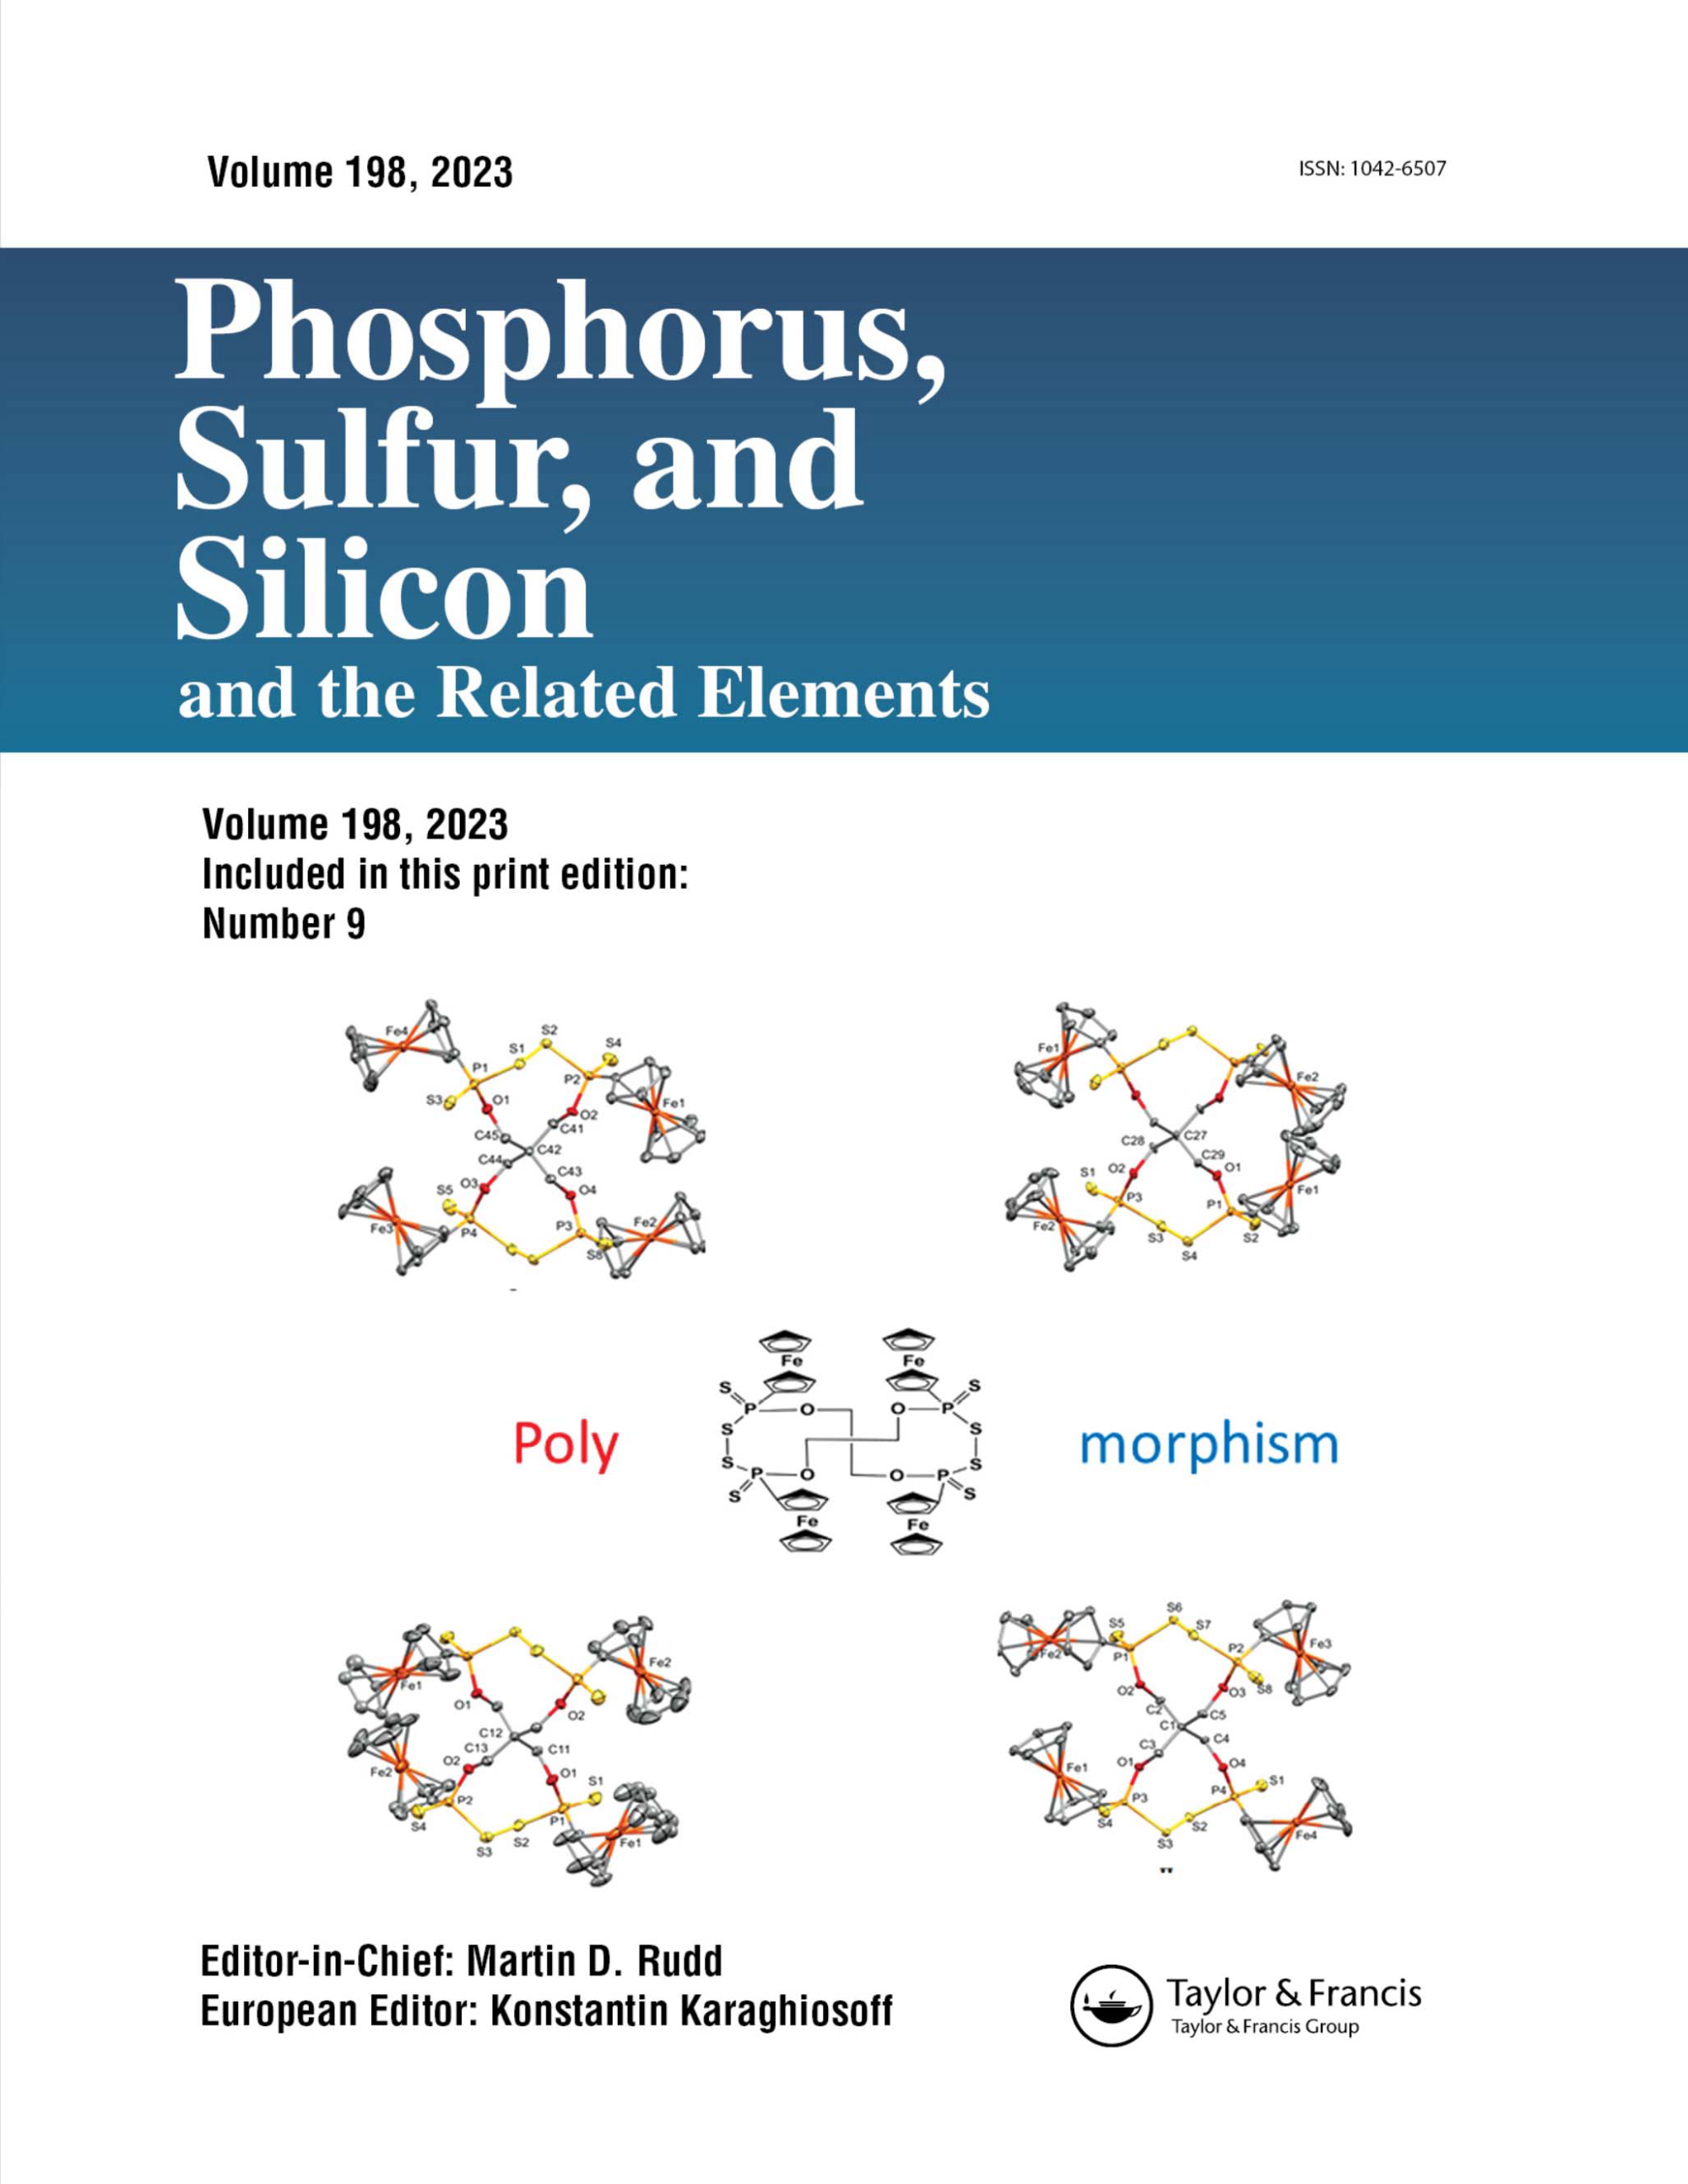 Cover image - Phosphorus, Sulfur, and Silicon and the Related Elements